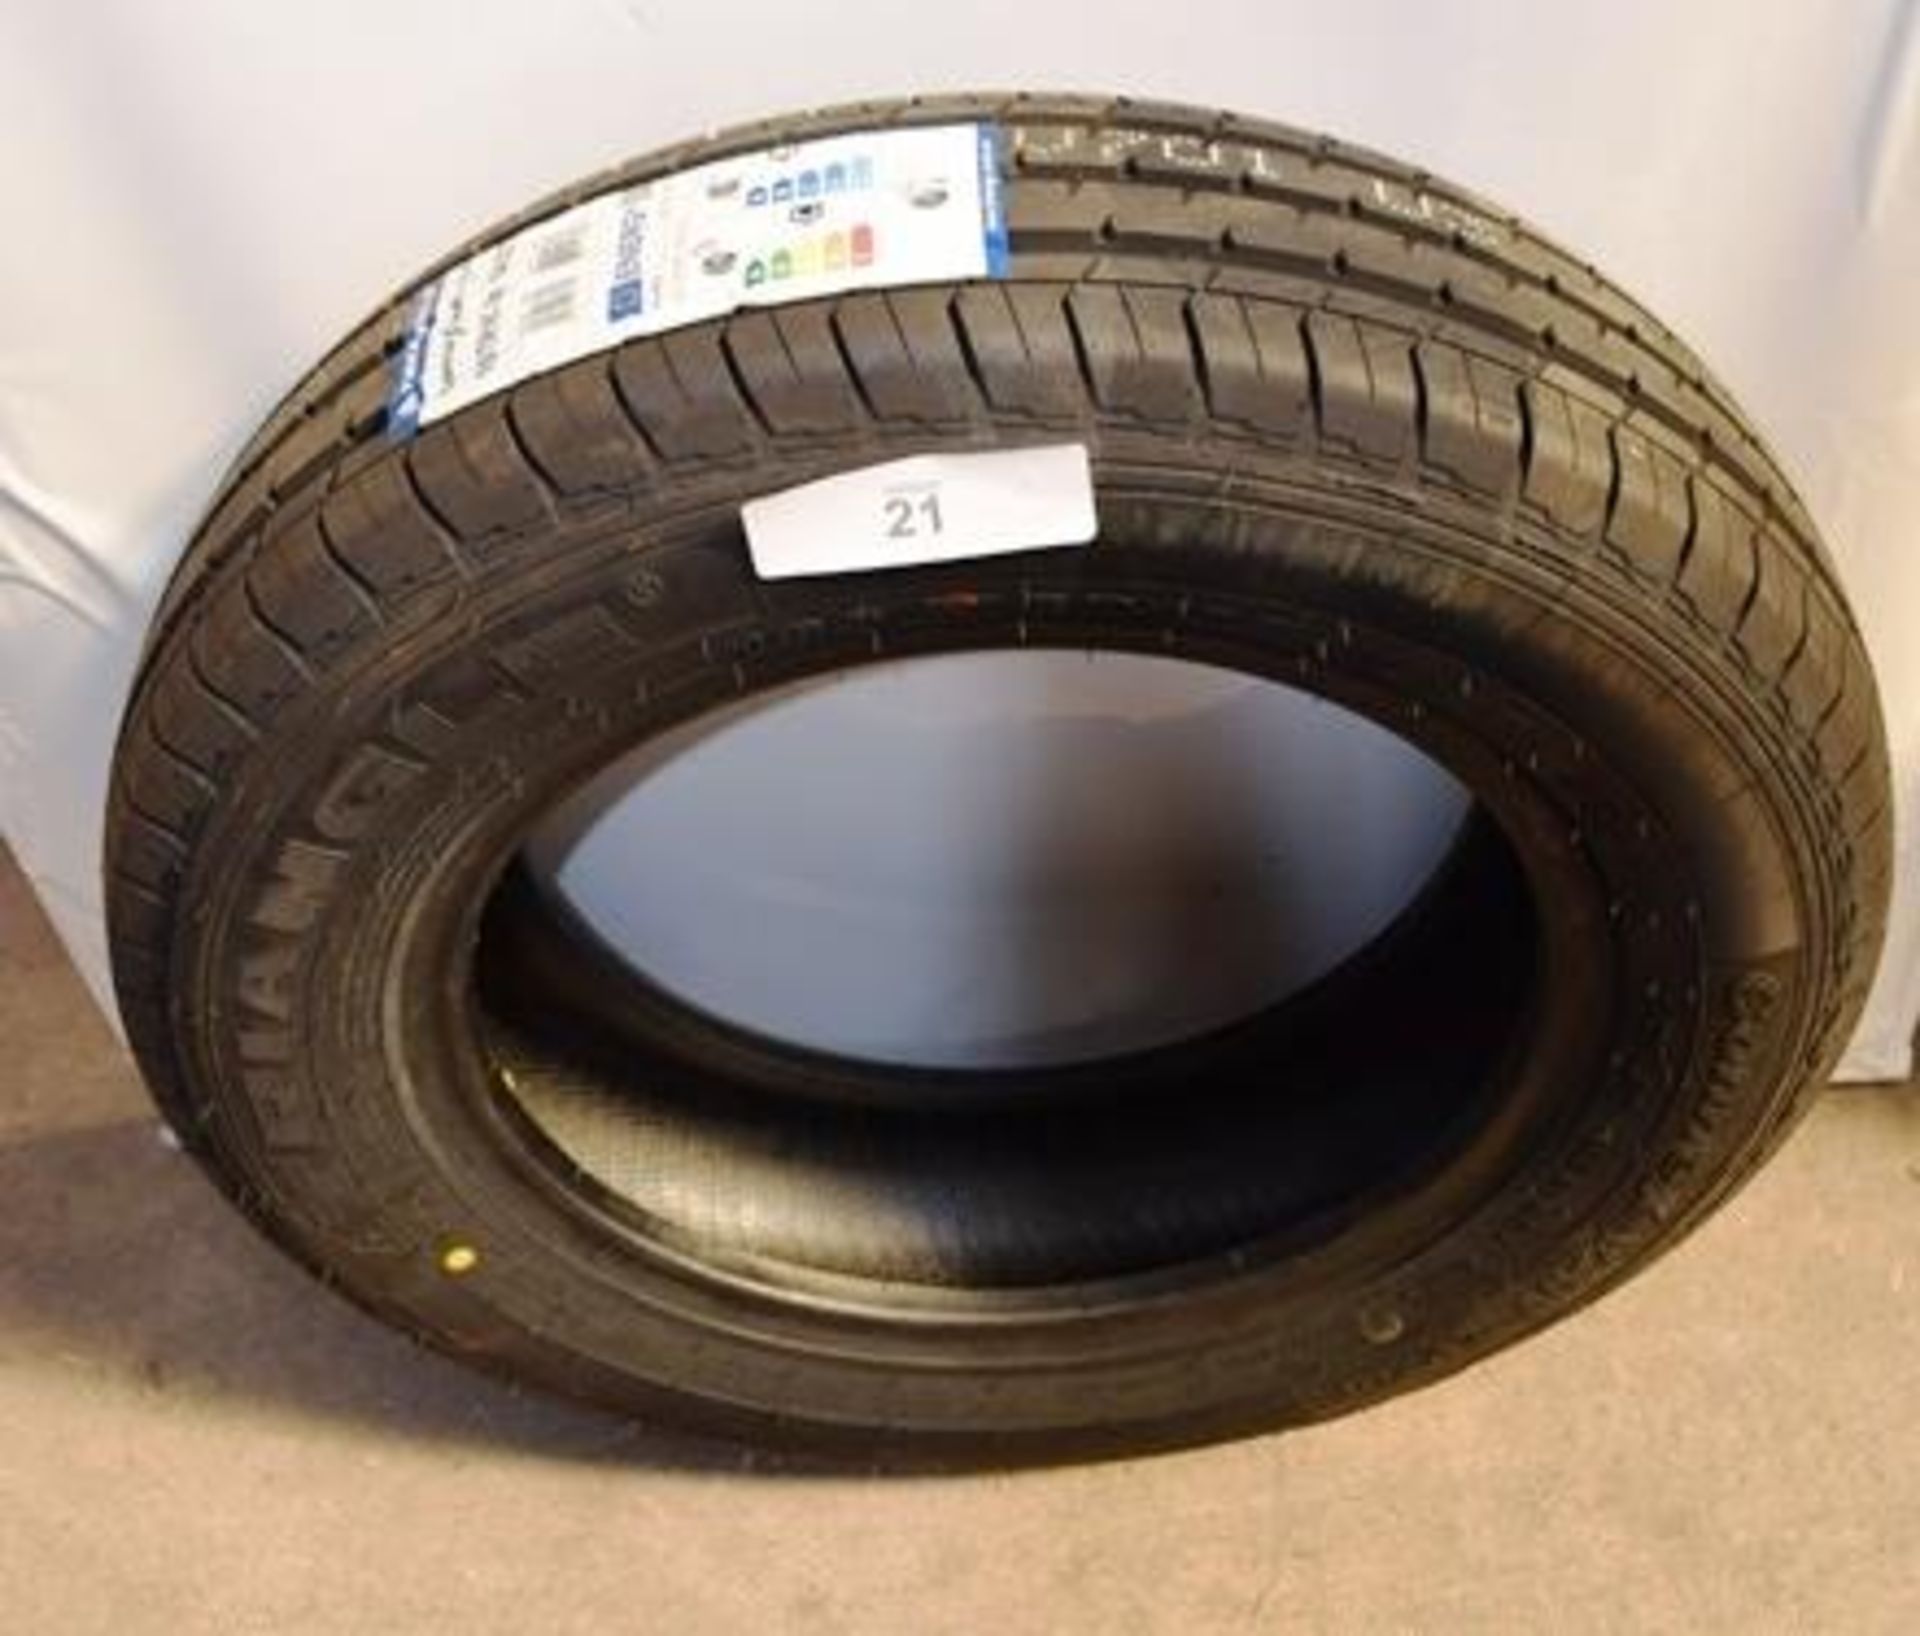 1 x Triangle ConnexVan TV701 tyre, size 185/75R16C 8PR 104/102T - New with label (GS2)